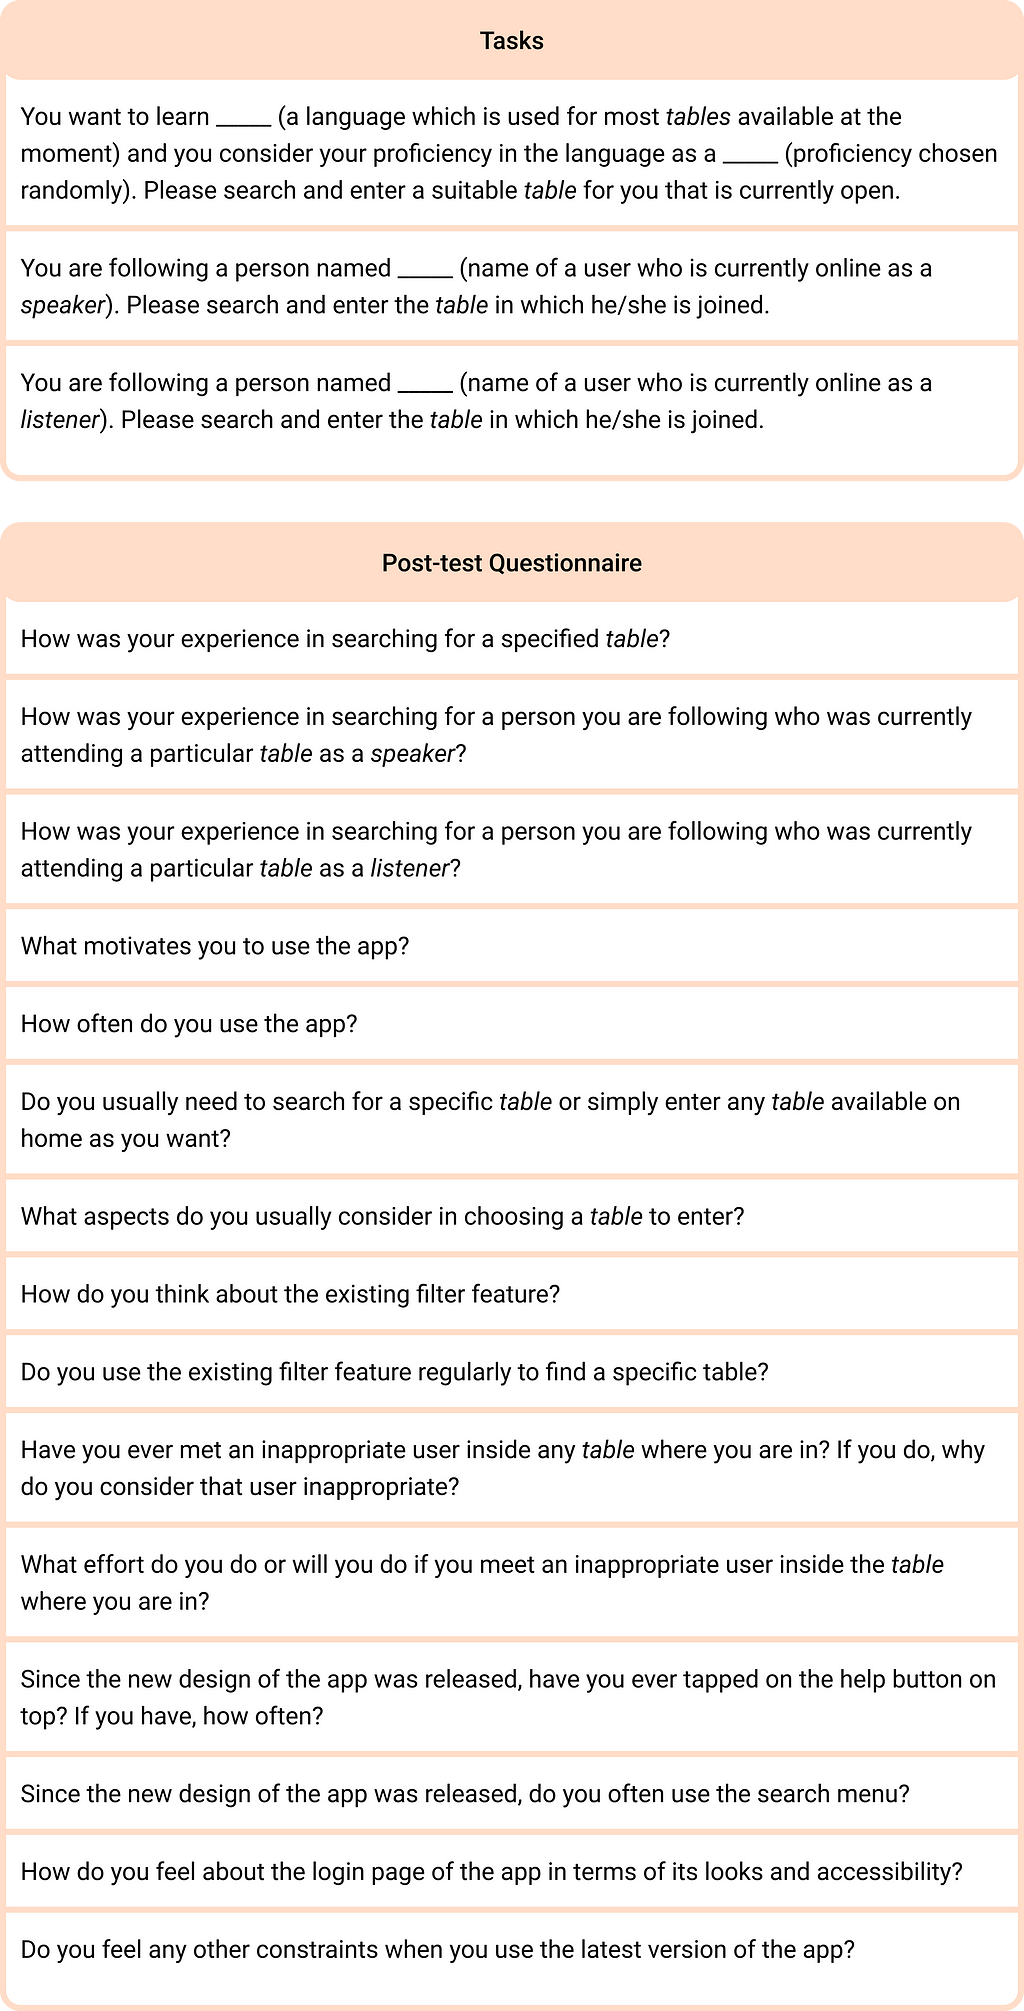 Initial usability testing tasks and user interview questions